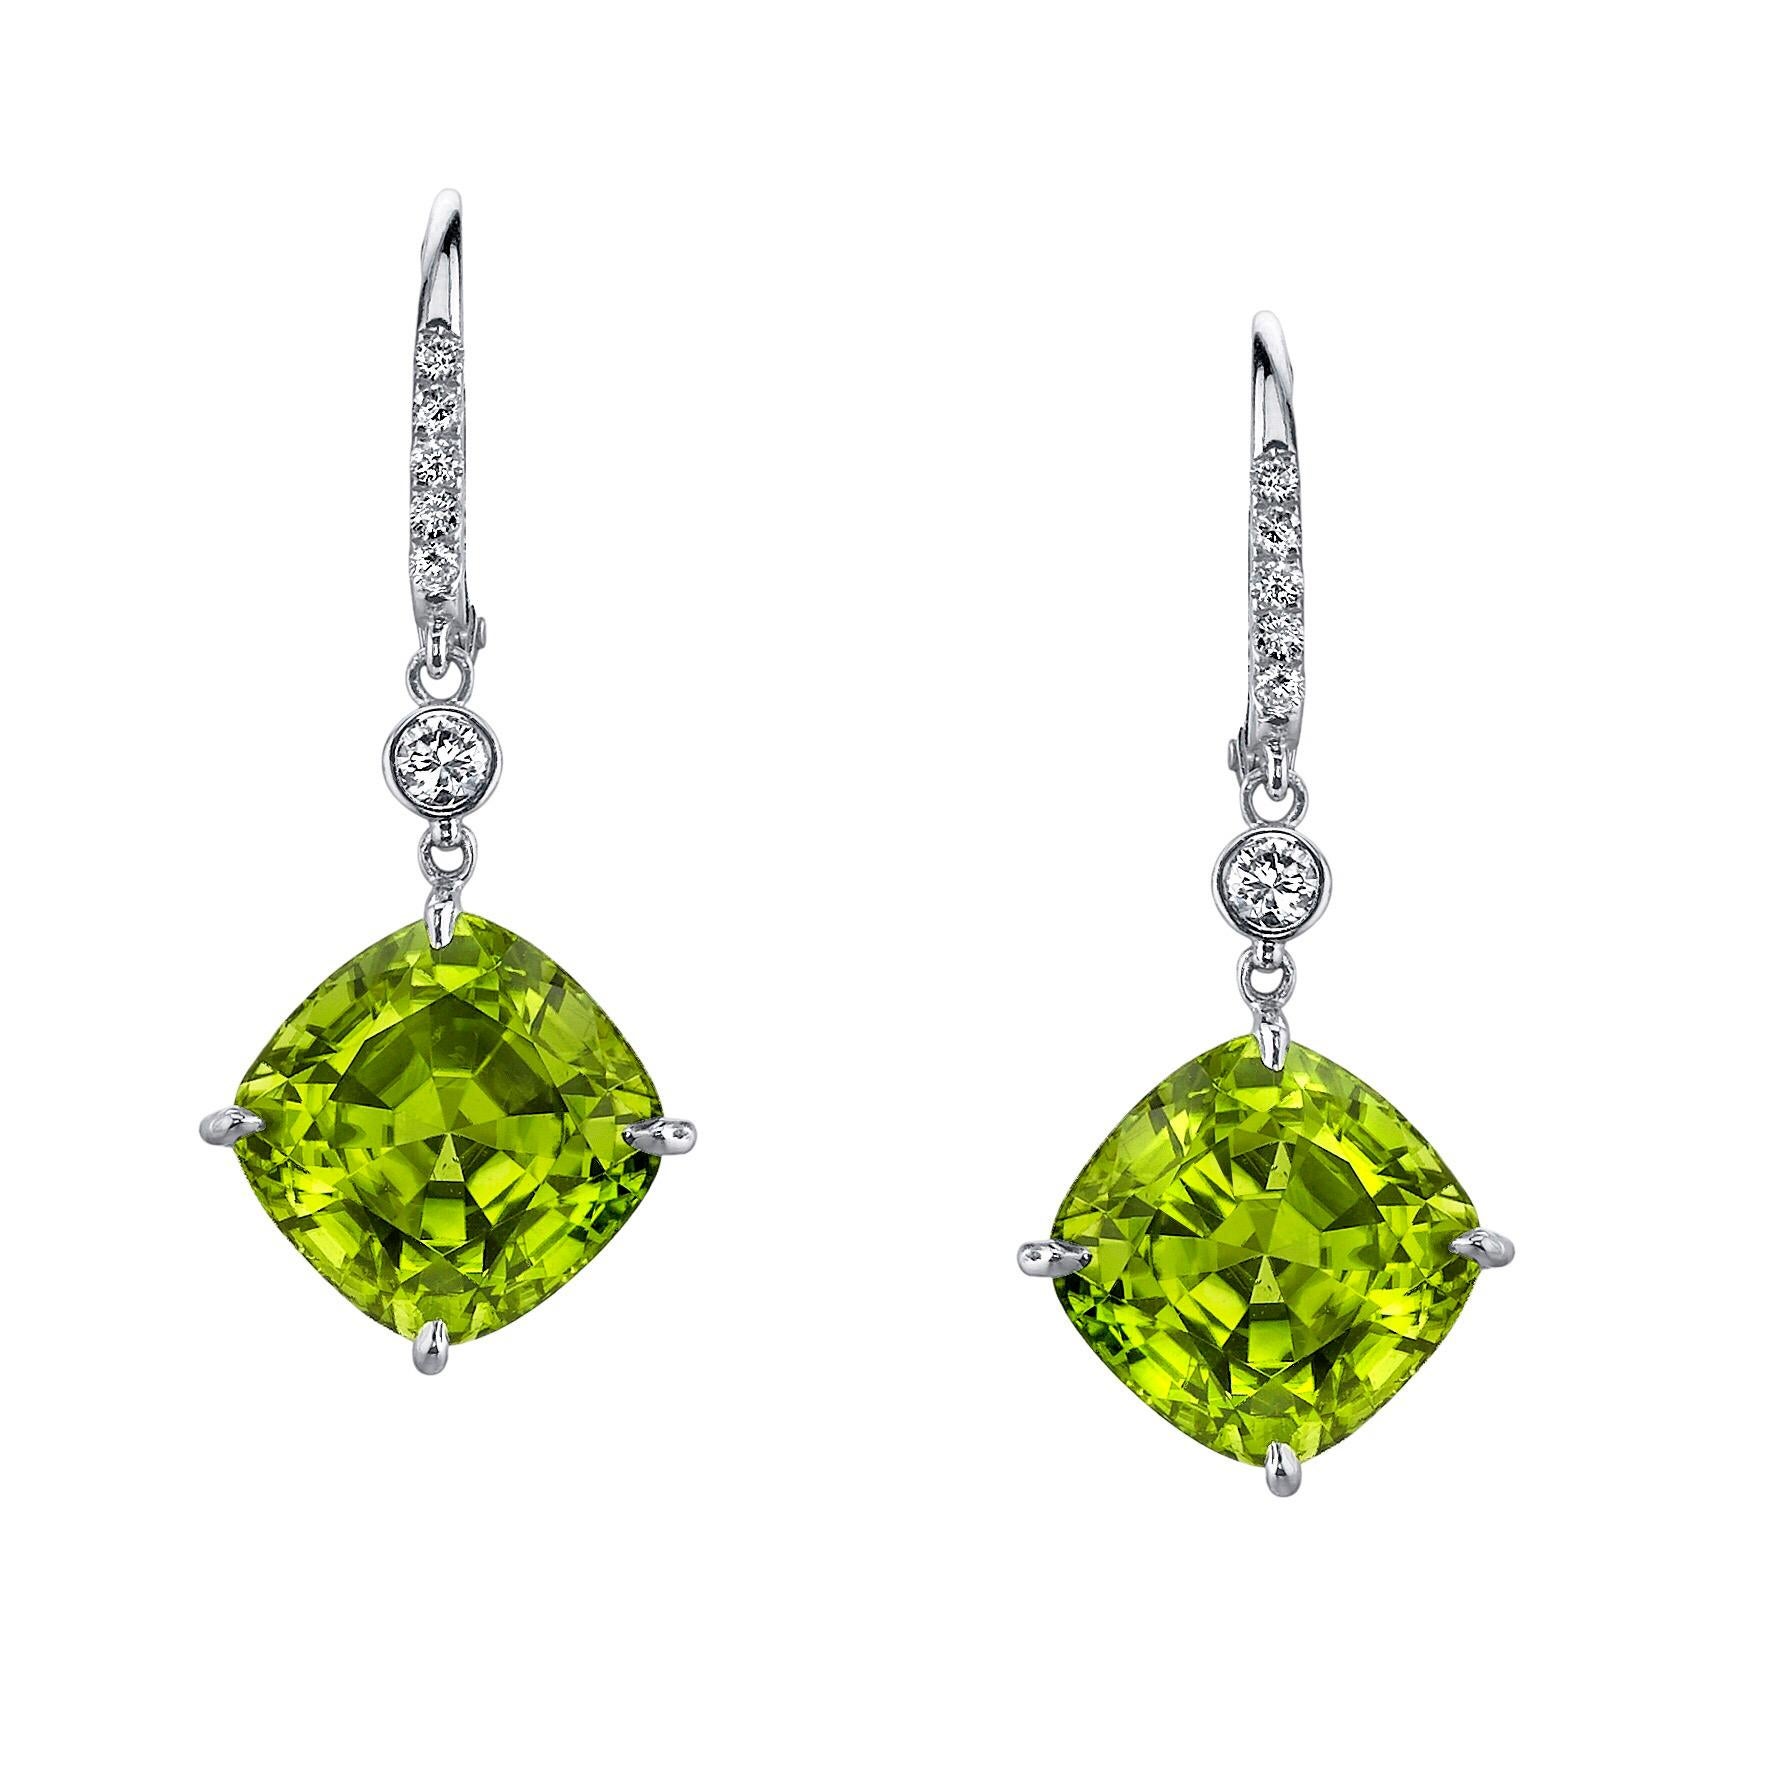 Striking pair of 12.32ct green Peridot cushions, and 0.26ct total round brilliant diamond, 18K white gold lever back Peridot drop earrings.
Total length: Approx. 1.25 inches.
***Returns are accepted and paid by us within 7 days of delivery.

Peridot